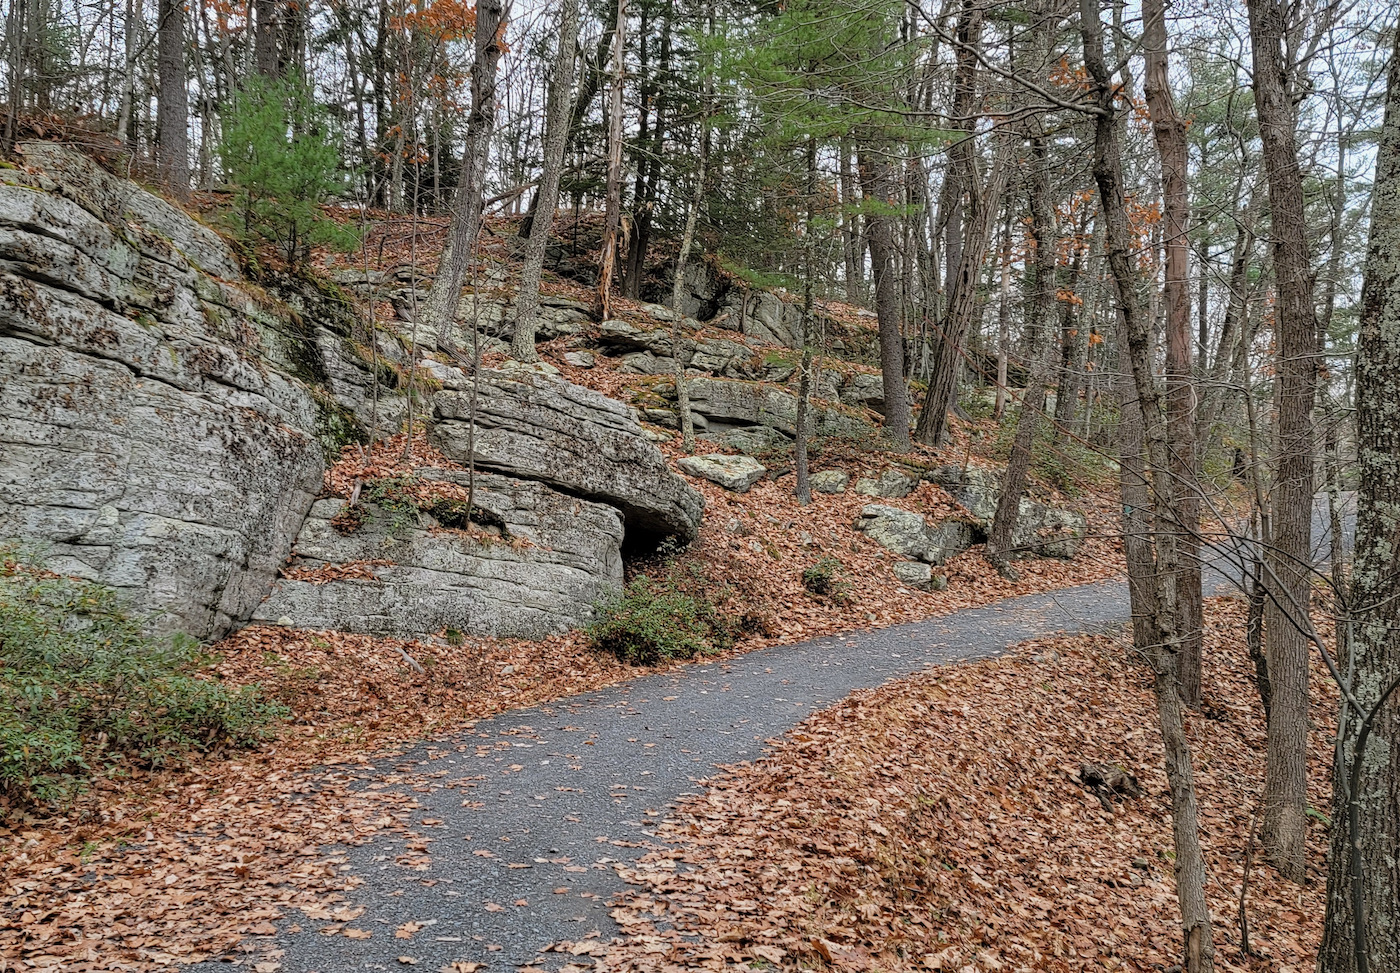 Mohonk carriage road